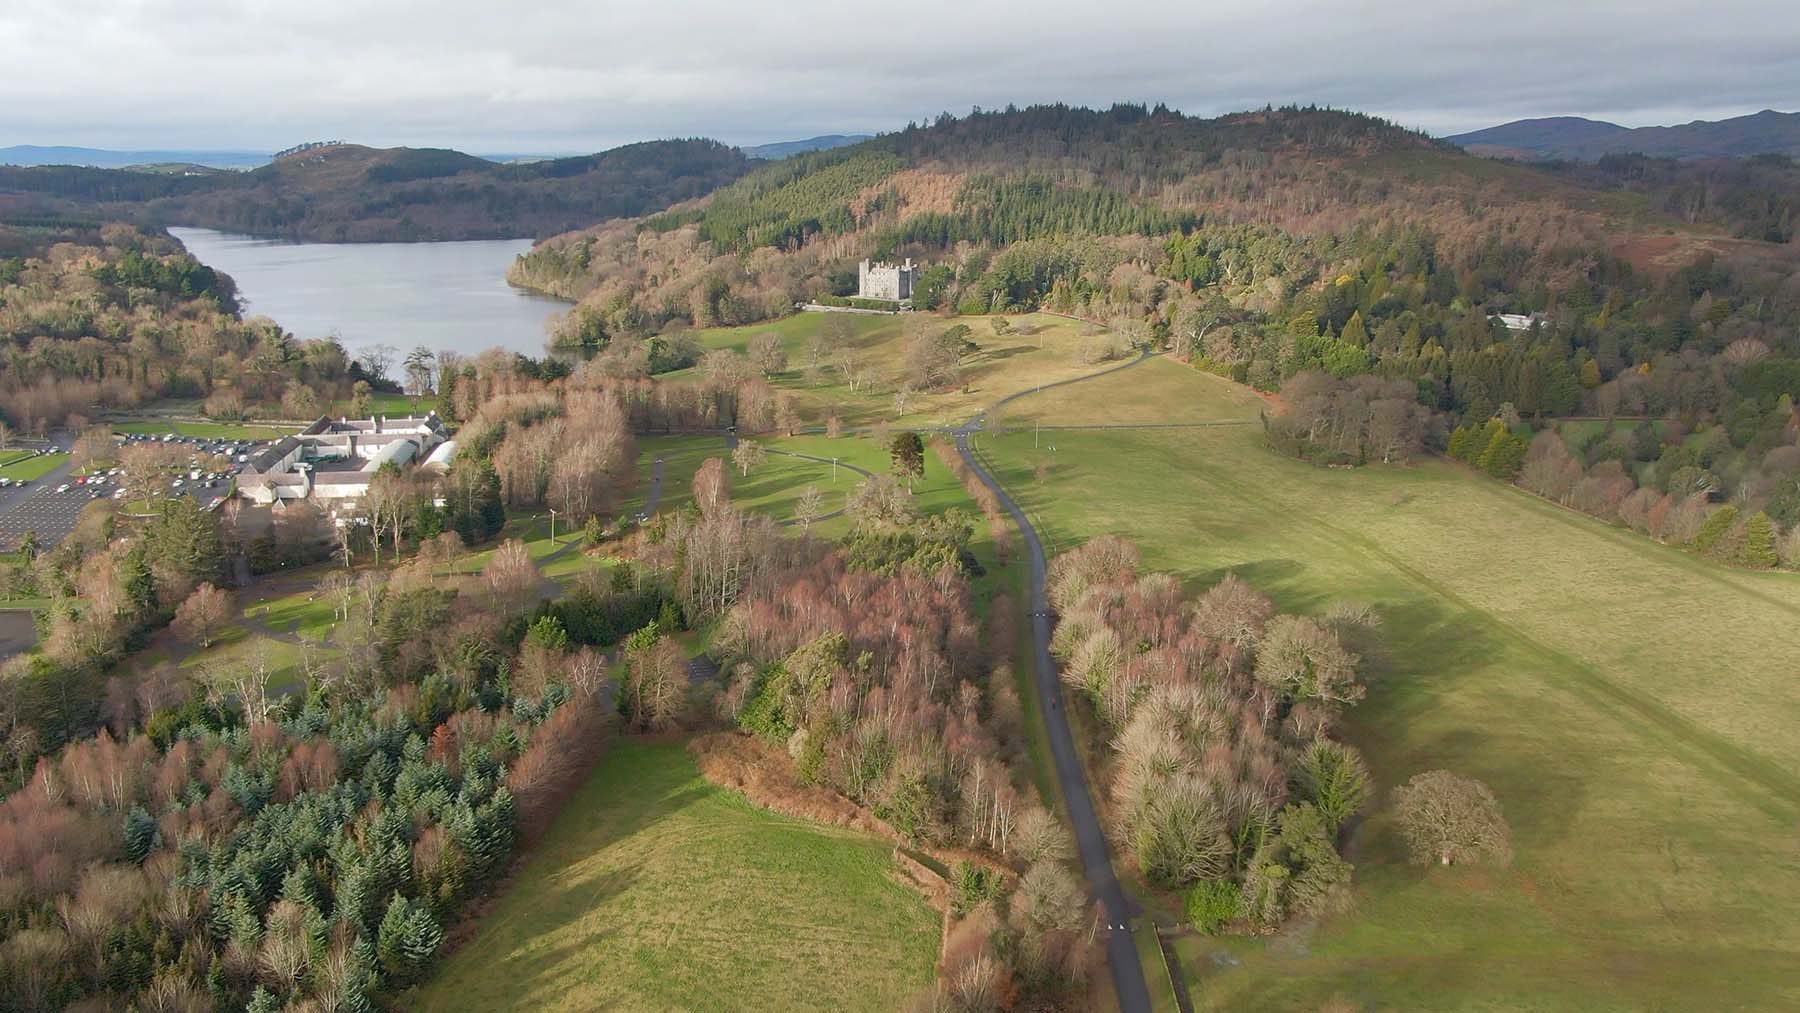 Video screenshot 2 of aerial footage of Castlewellan Forest Park, castle and lake, from video by Stephen S T Bradley aerial hotel video production in the UK and Ireland